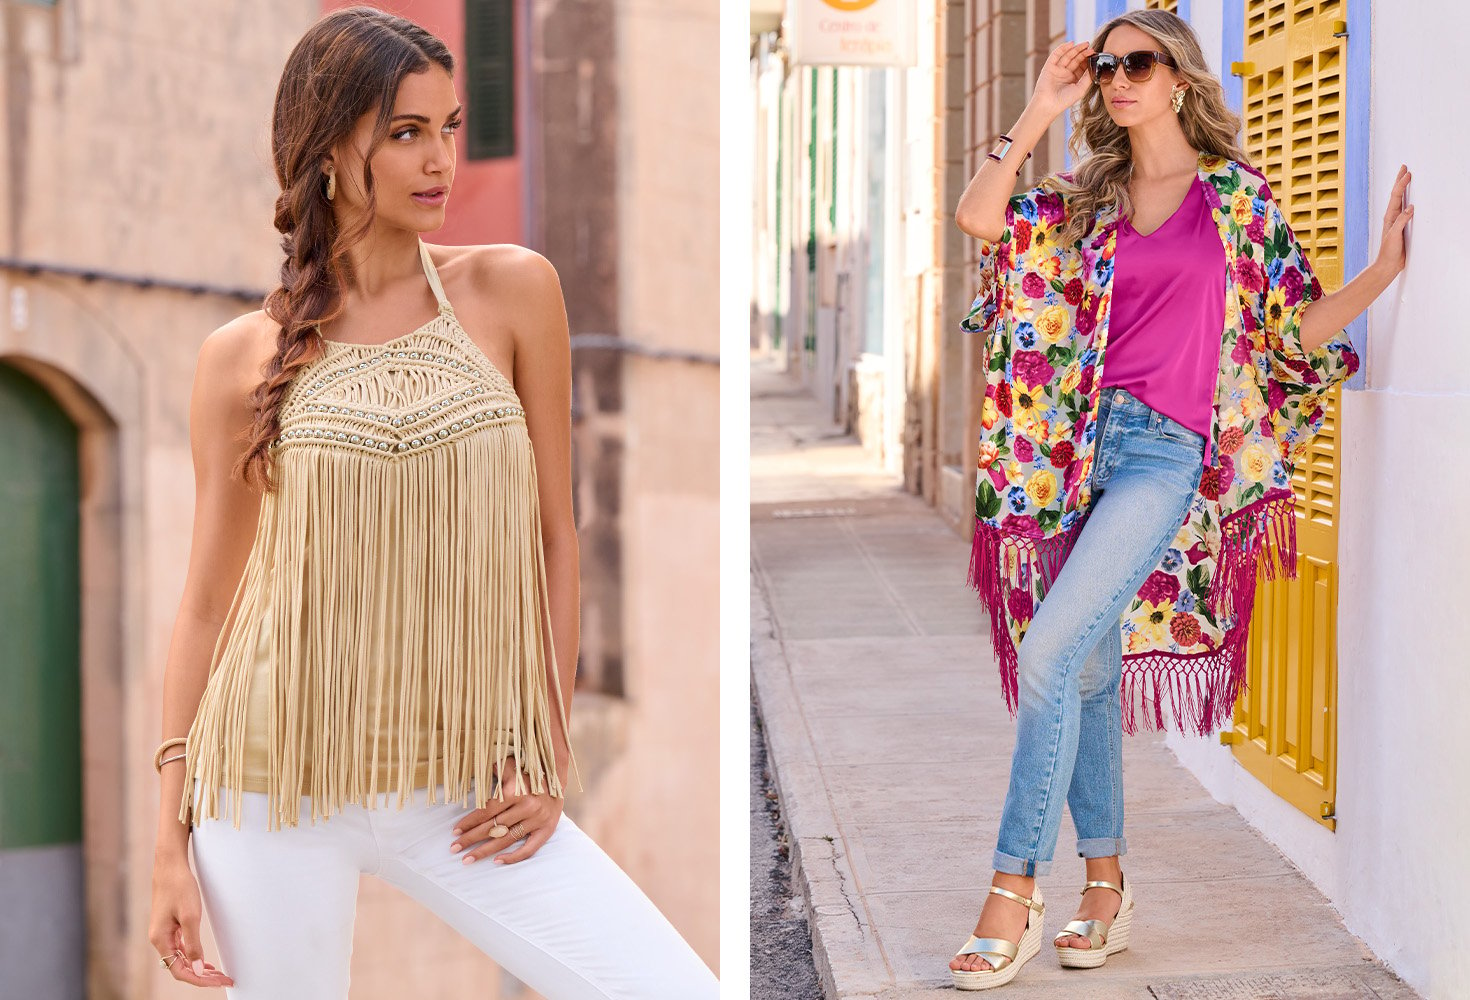 Left model wearing a tan embellished fringe and macrame halter top and white jeans. Right model wearing a multicolor fringe floral print kimono, pink v-neck charmeuse blouse, jeans, metallic gold wedges, and sunglasses.